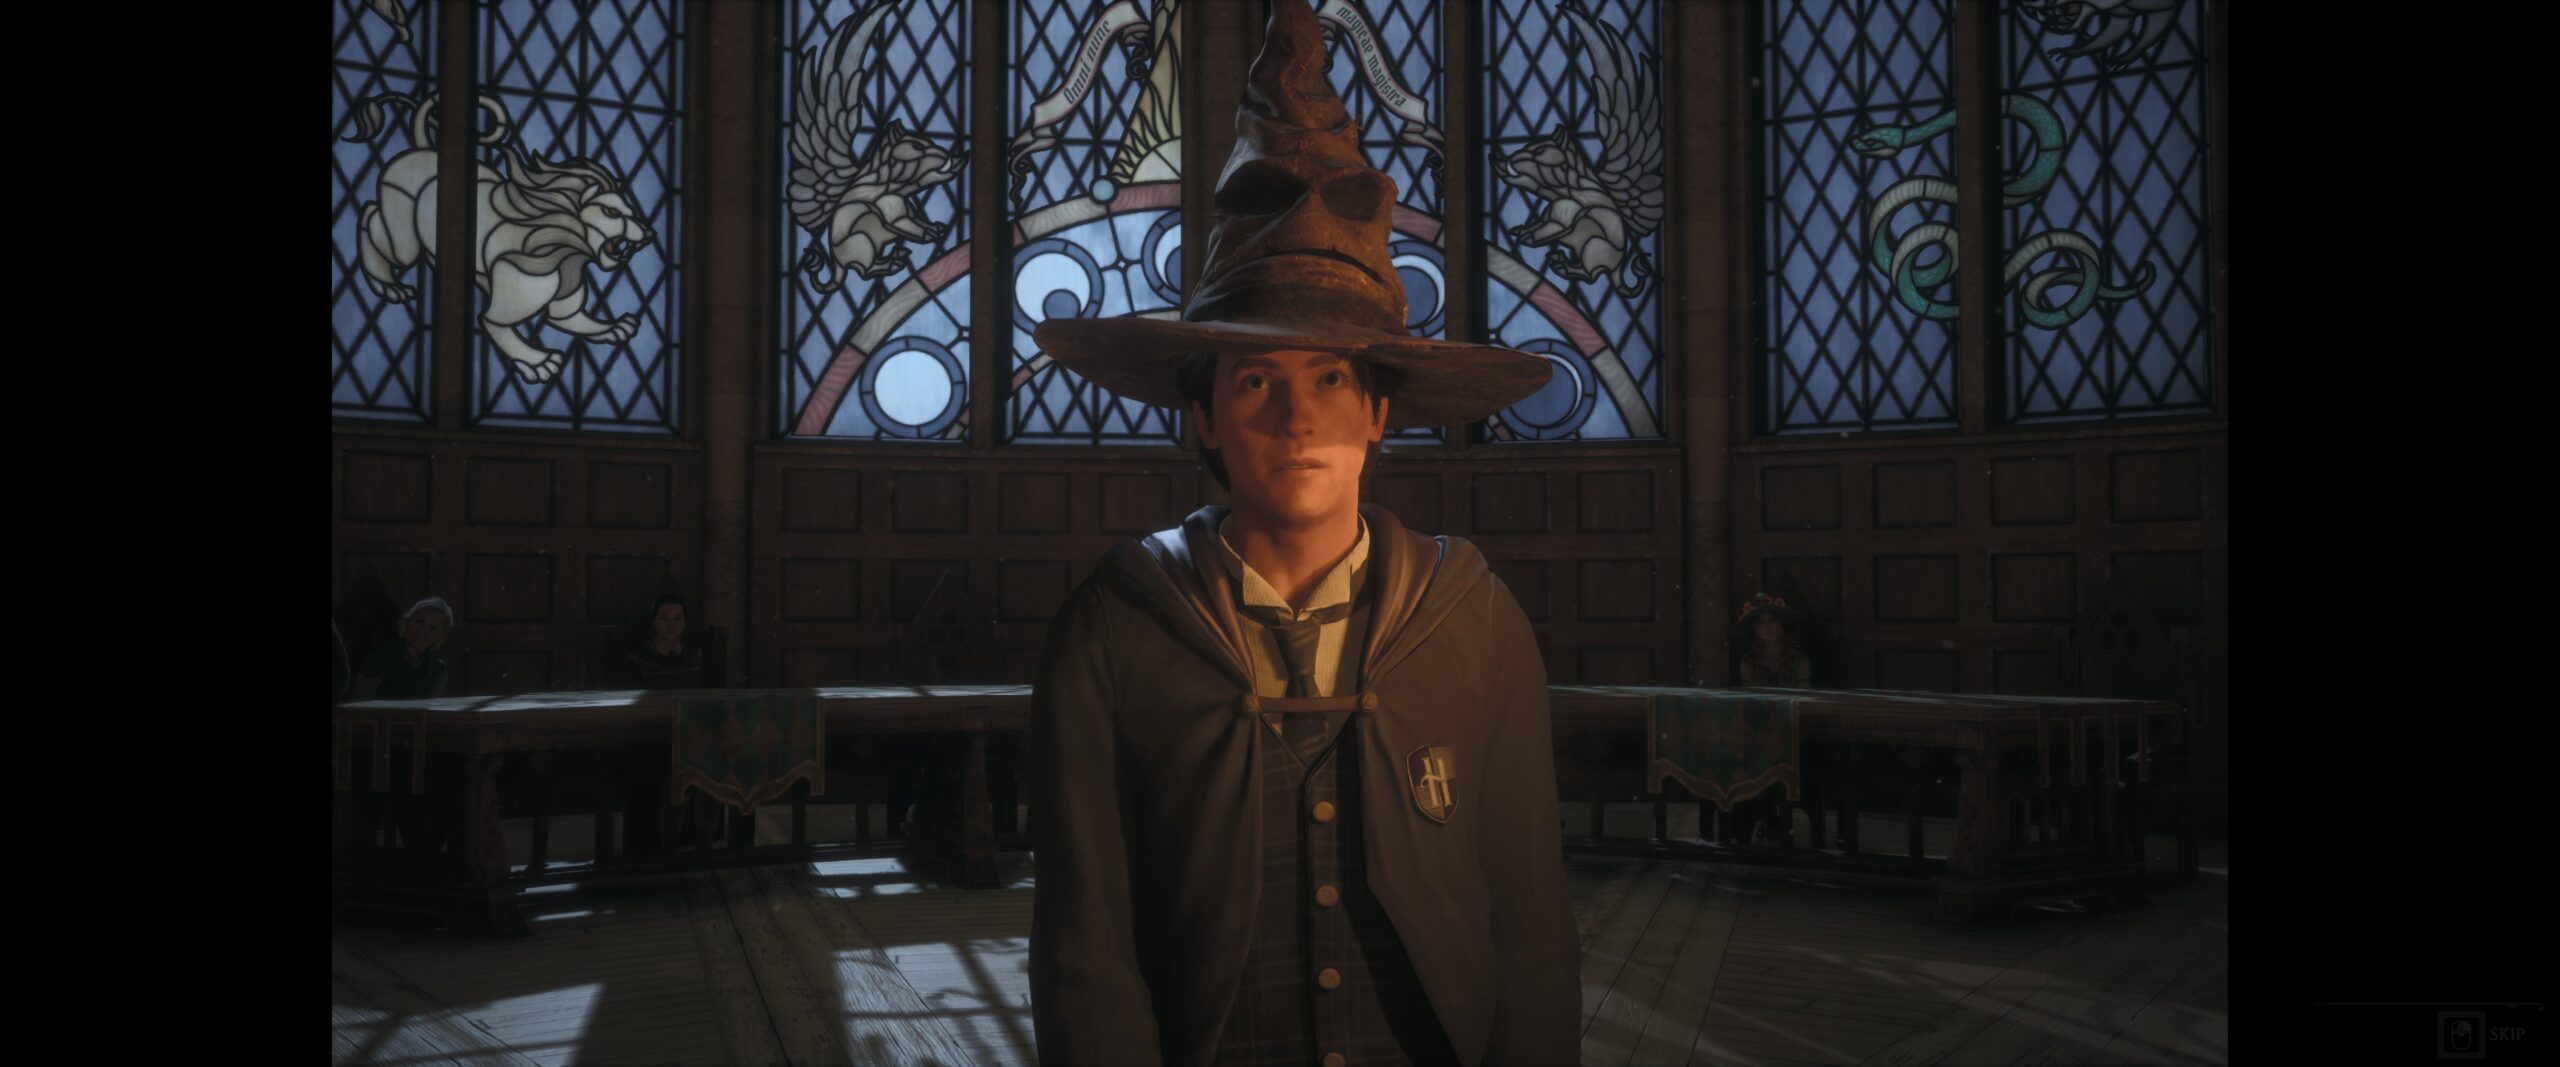 Hogwarts Legacy review: Tries to do too much all at once